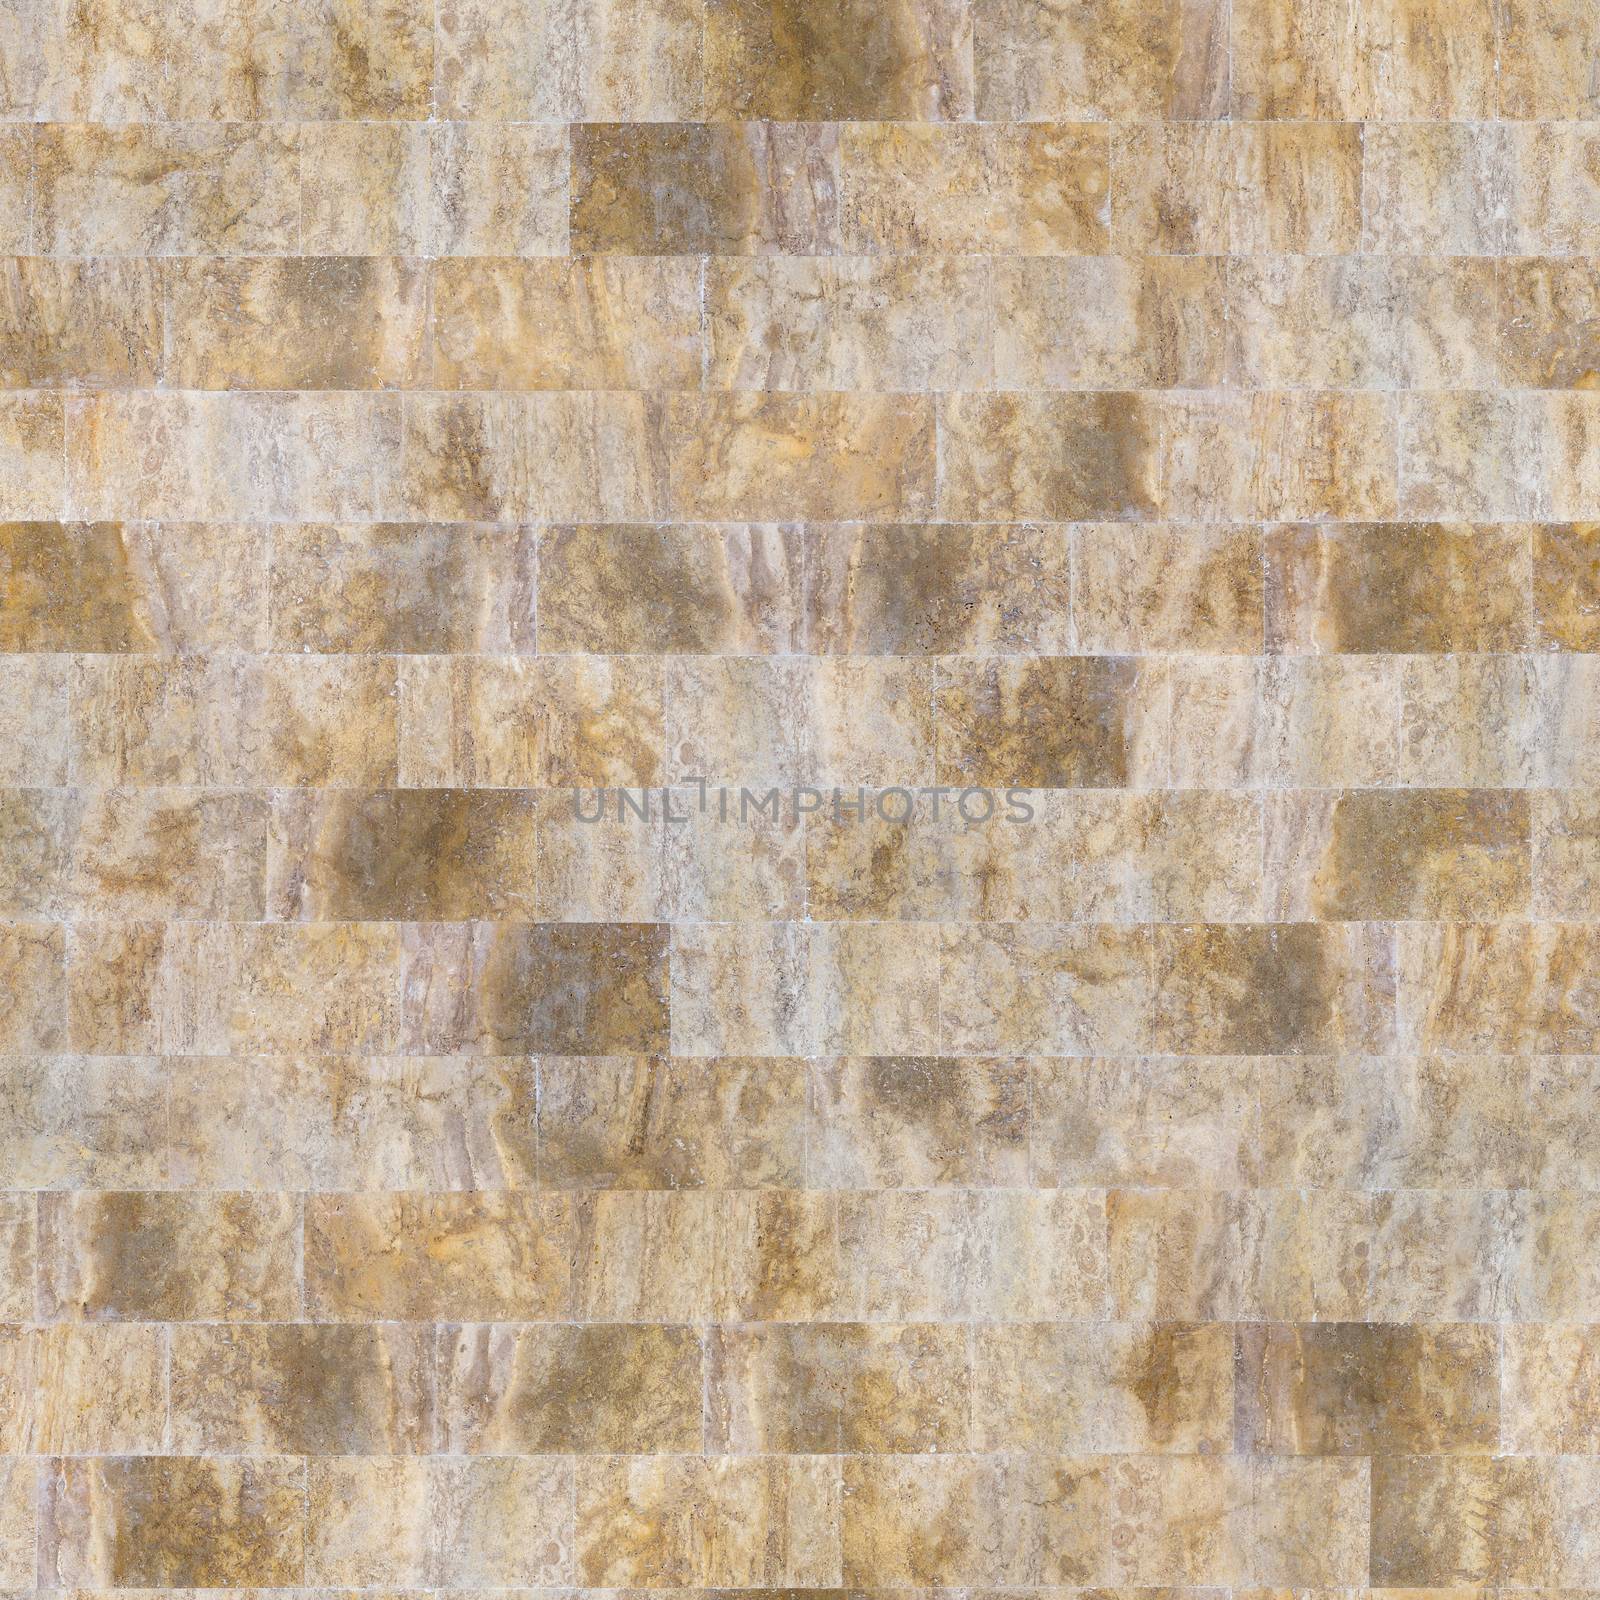 Bathroom tiles are made in brown colors .Background or texture